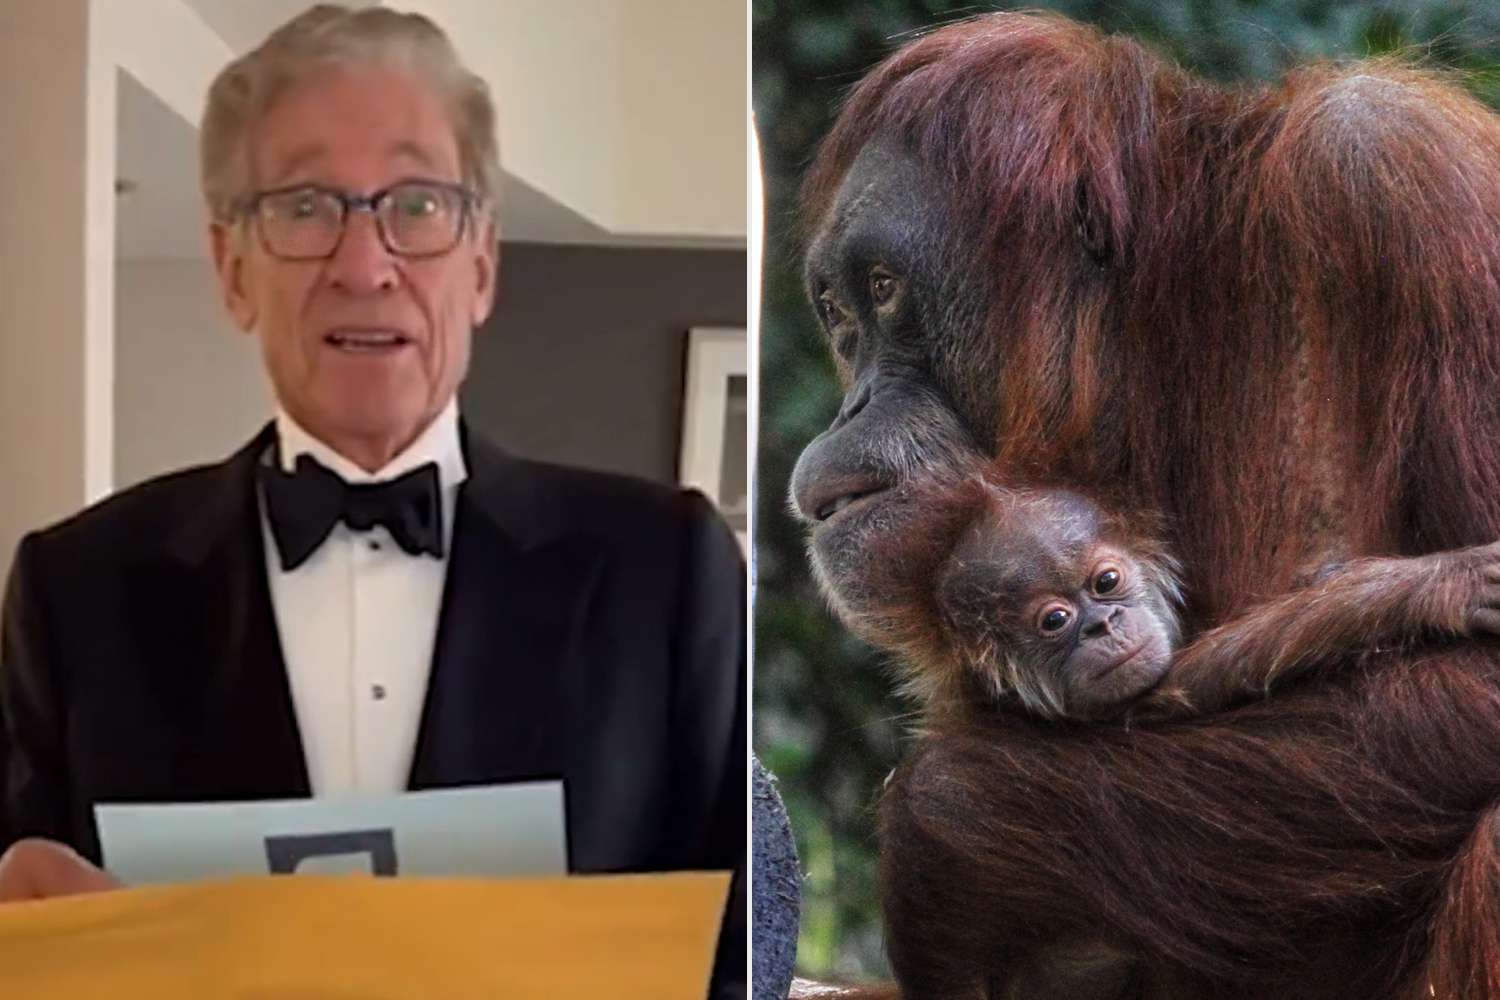 Maury Povich Reveals Paternity Test Results For Baby Orangutan At Denver Zoo